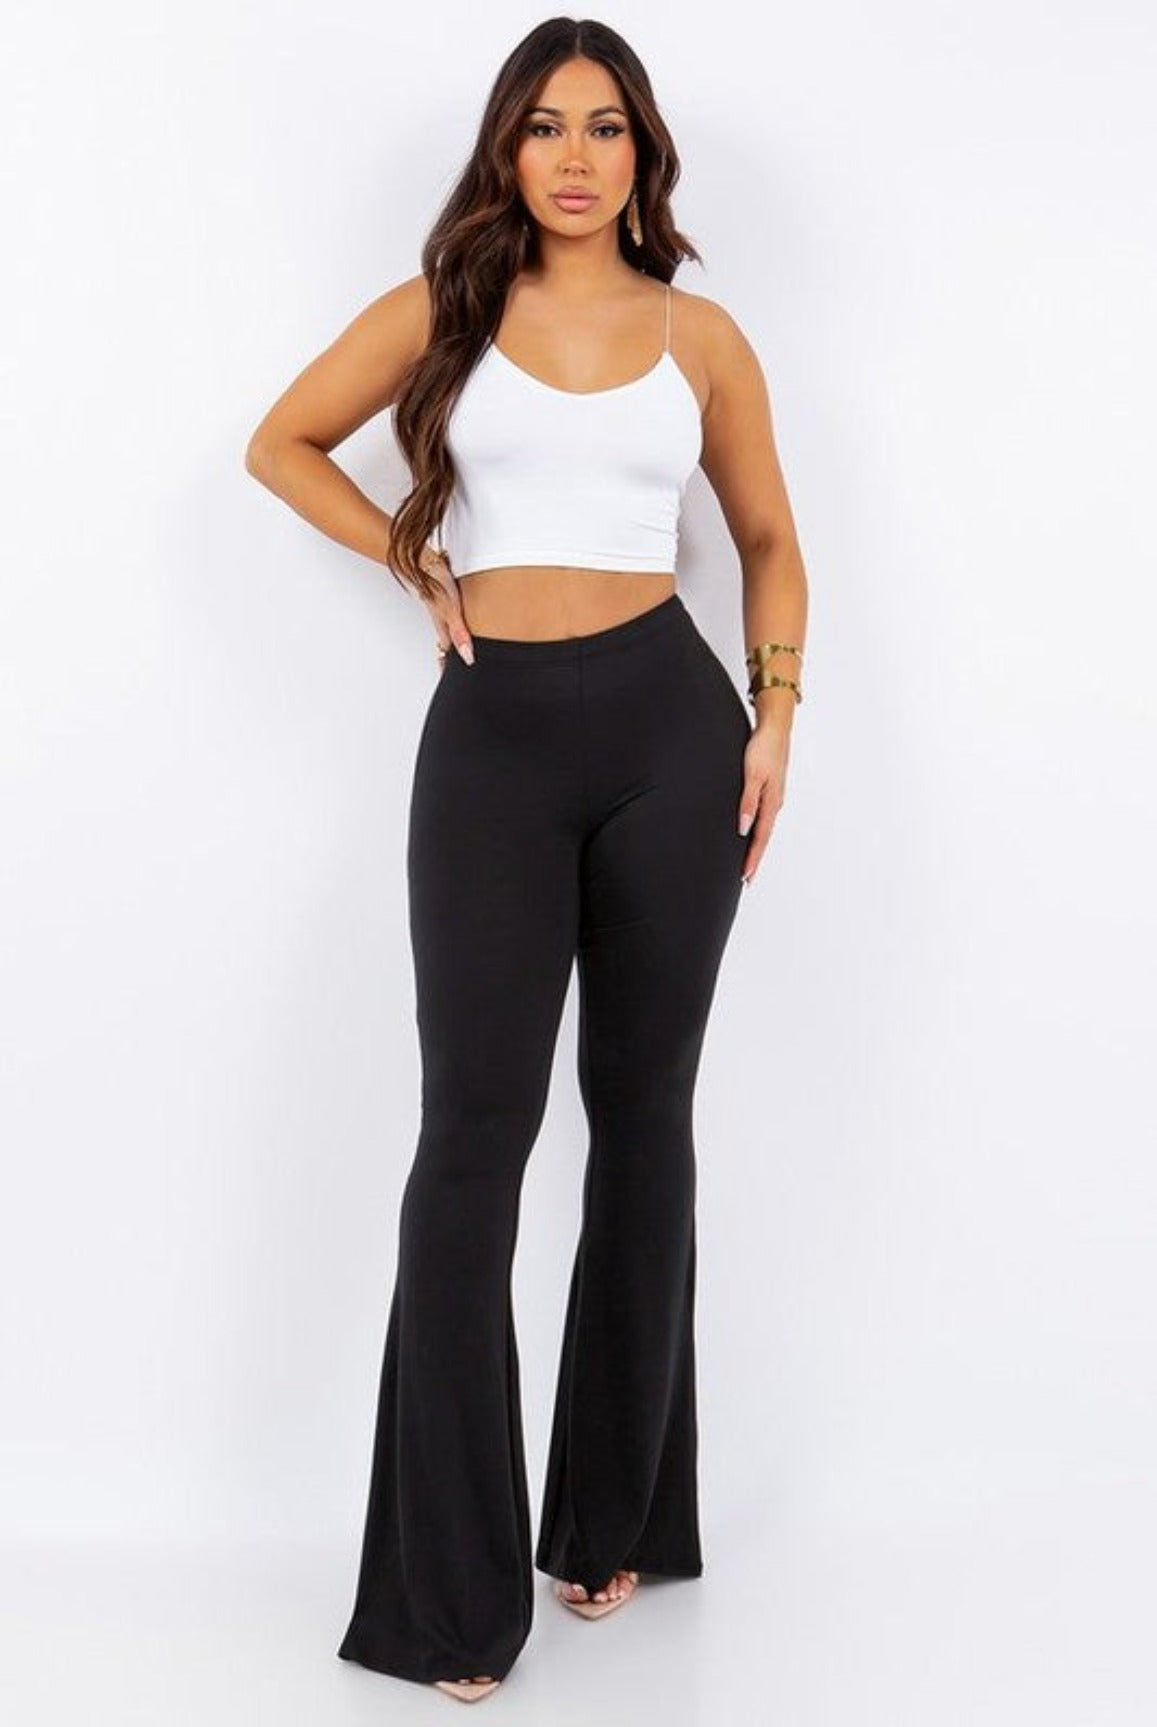 Stacked Pants Women Solid High Waist Drawstring Bottom Flare